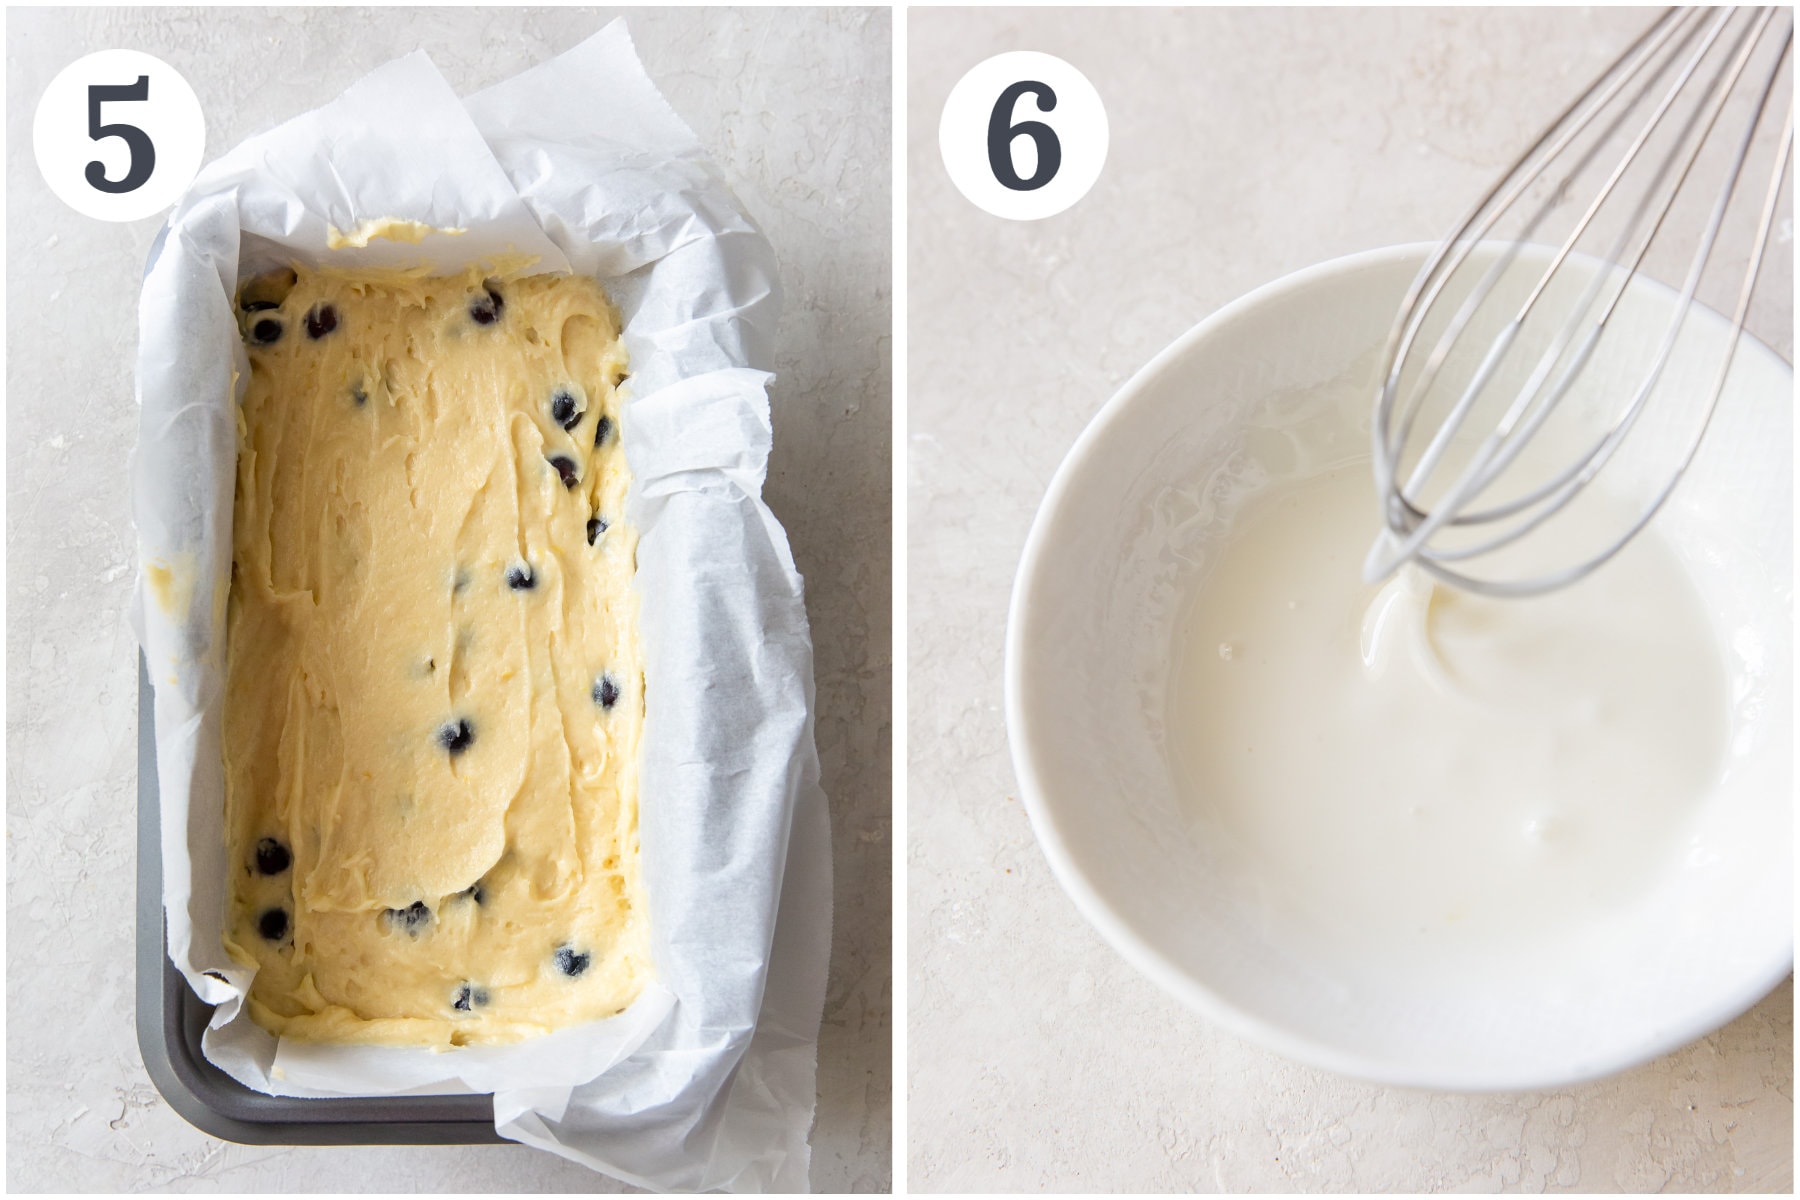 photo collage demonstrating how to make lemon blueberry bread in a loaf pan and make a lemon glaze.